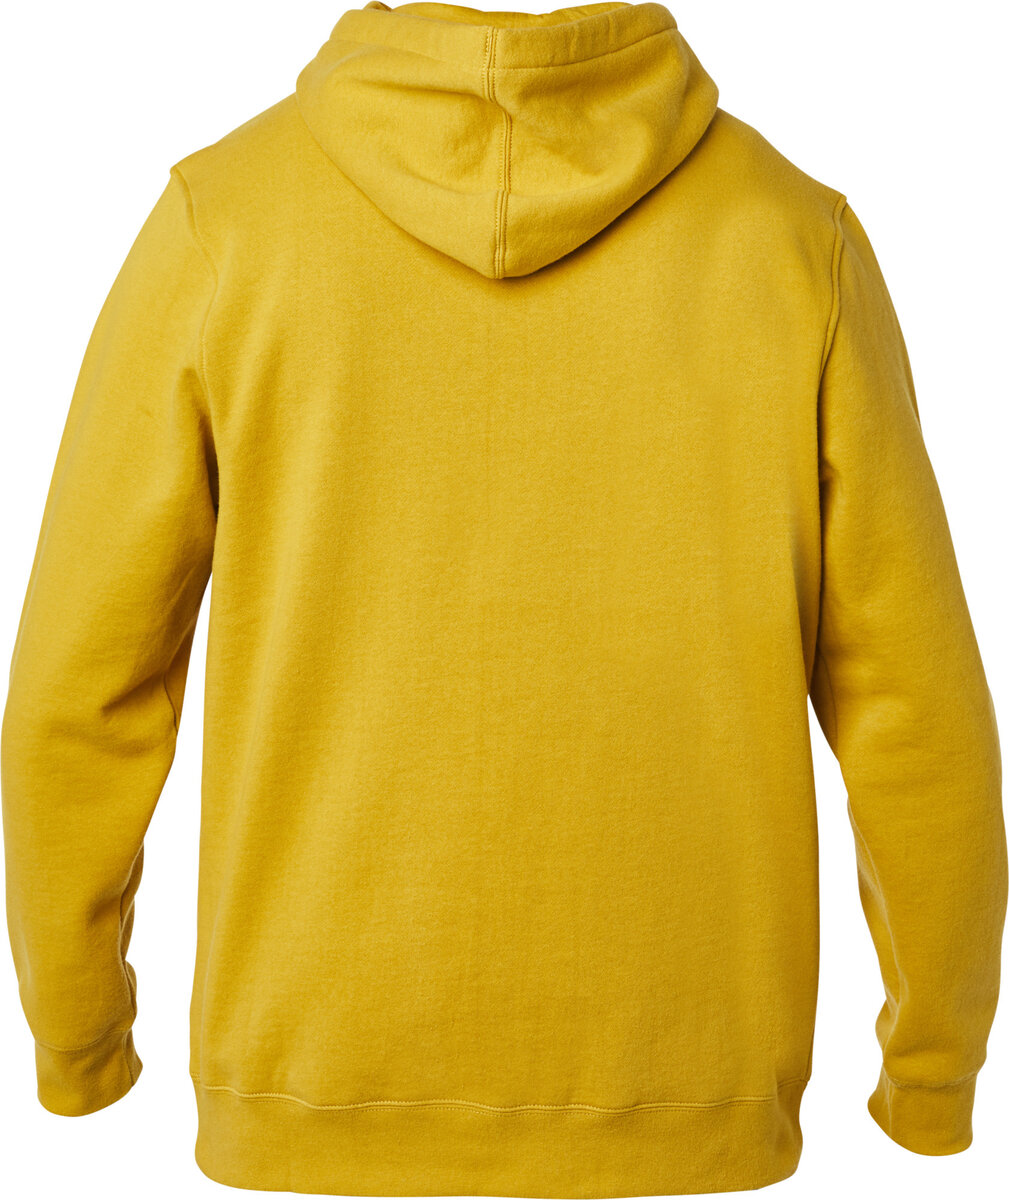 Yellow Pullover Hoodie - Deal20one